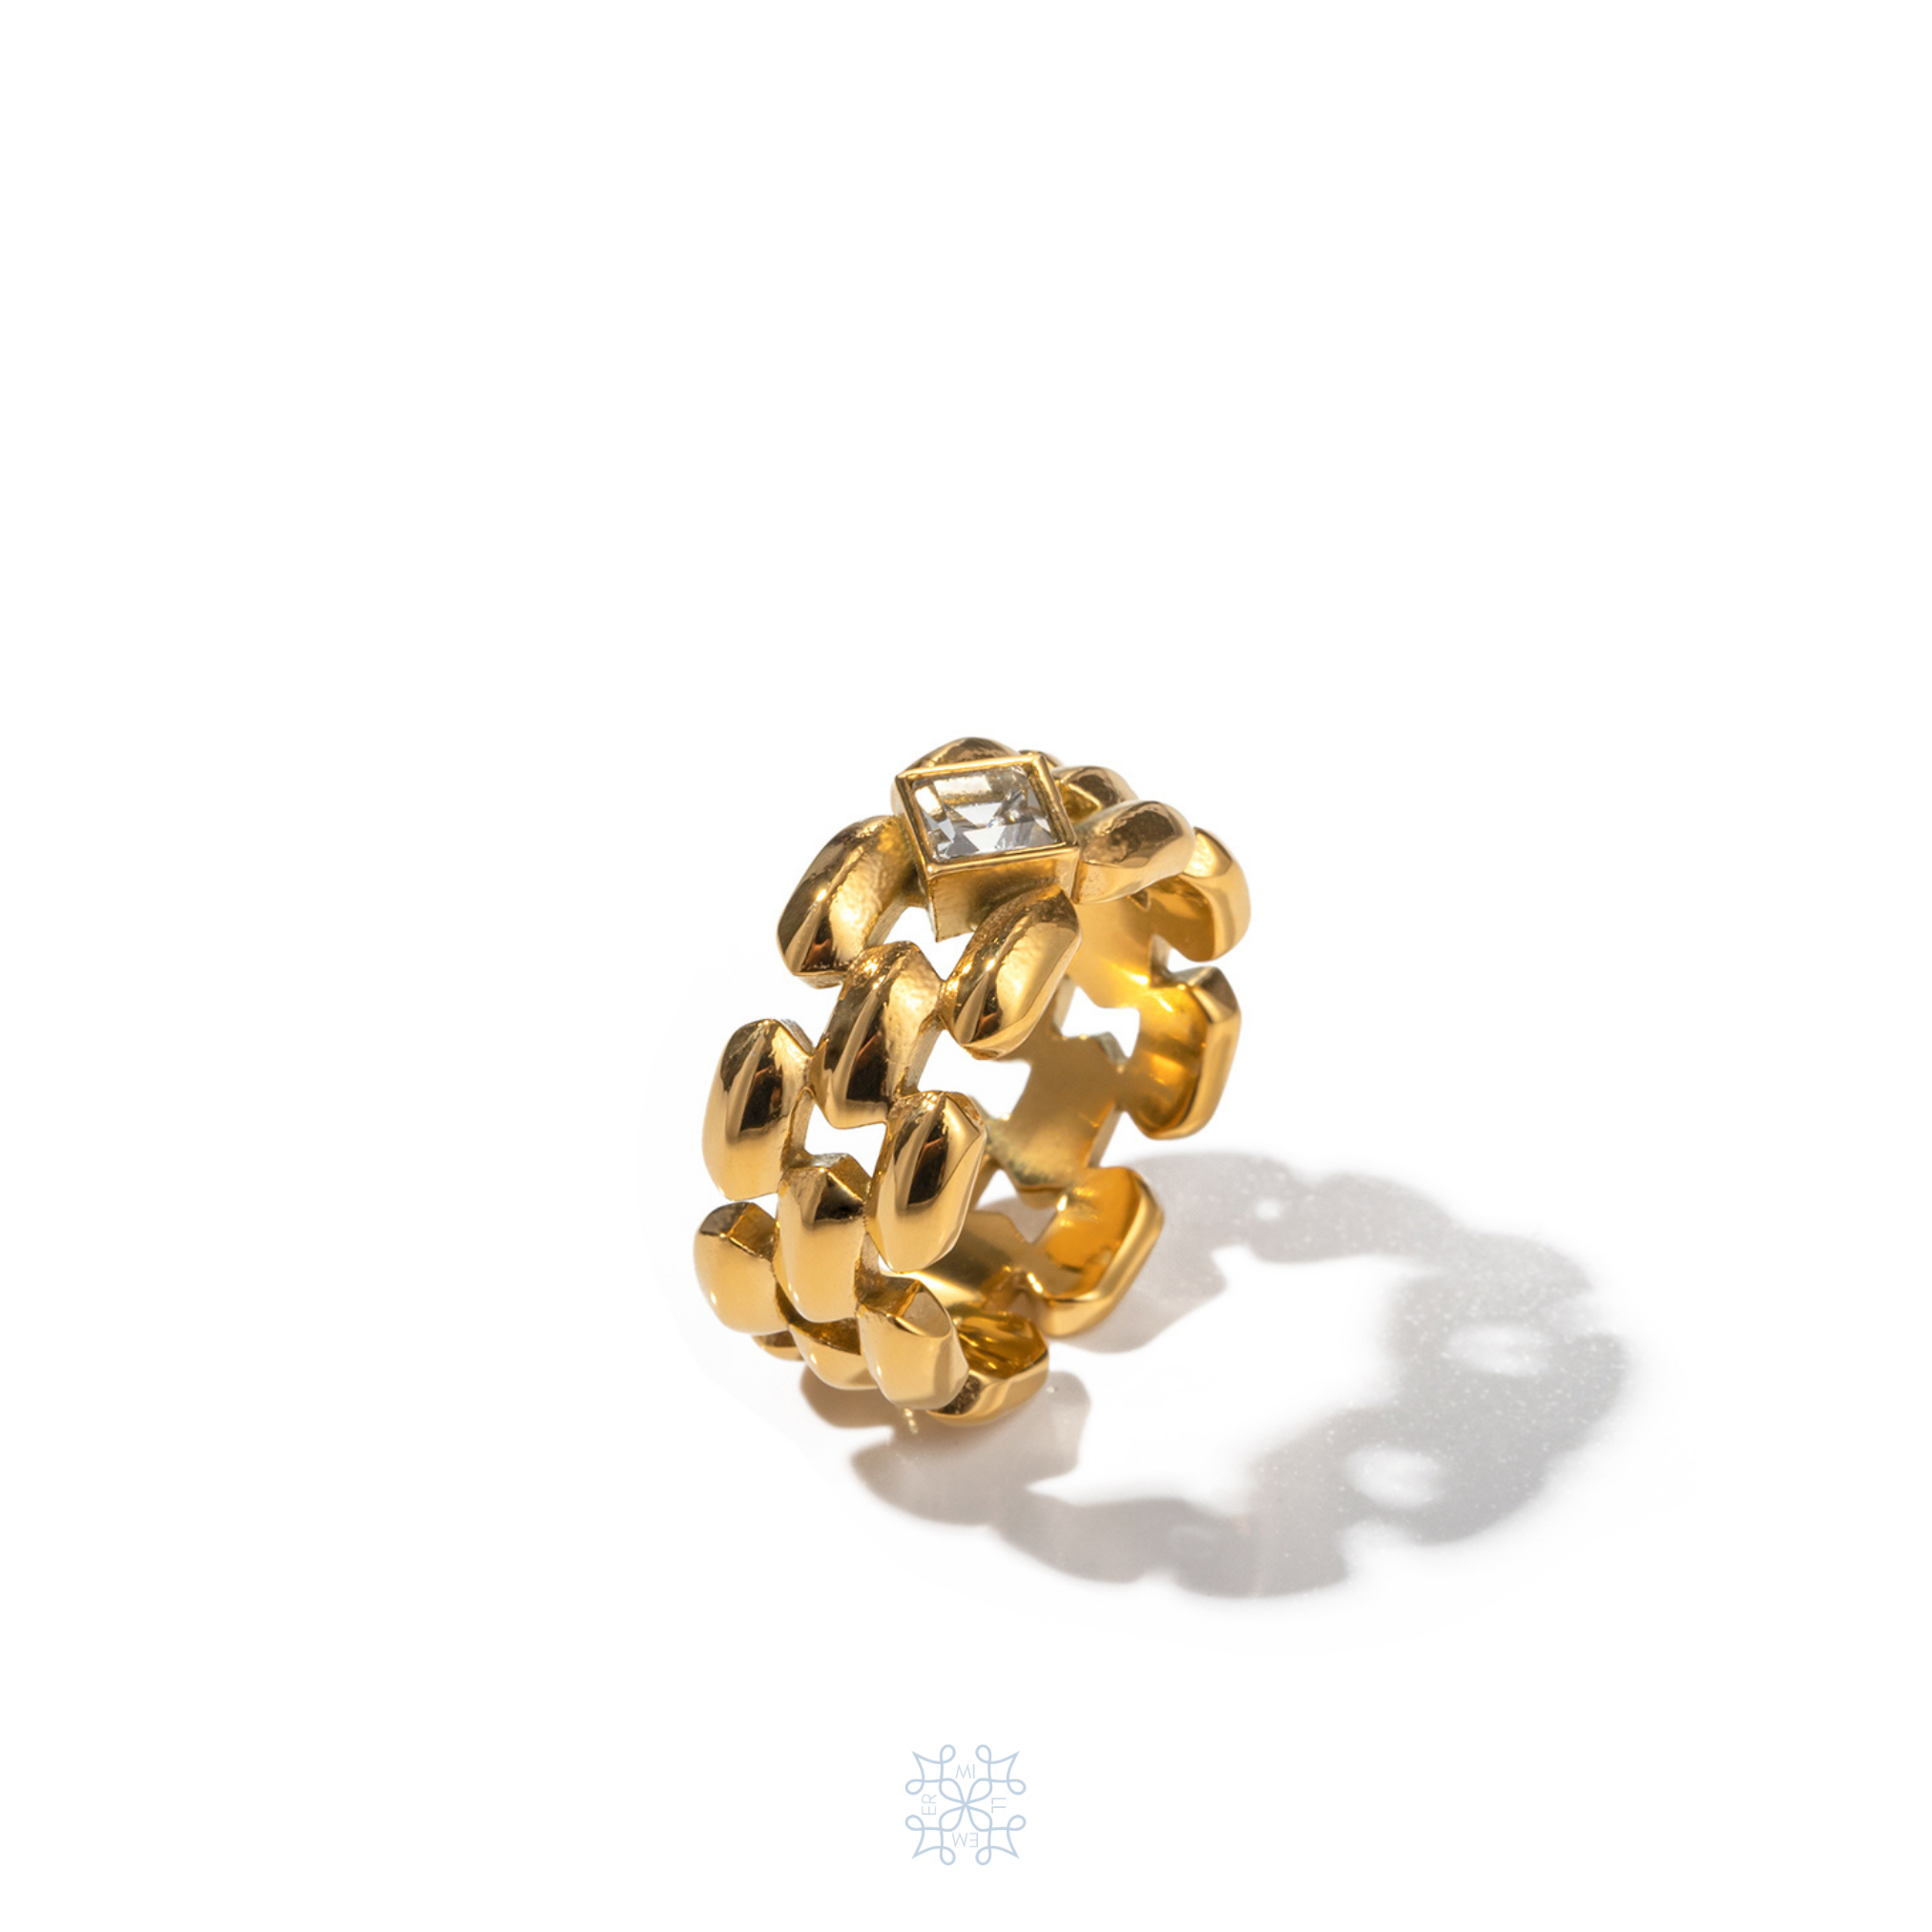 Monaco Zircon Gold Chain Ring. Chain shape gold ring with a rombus white zircon on top